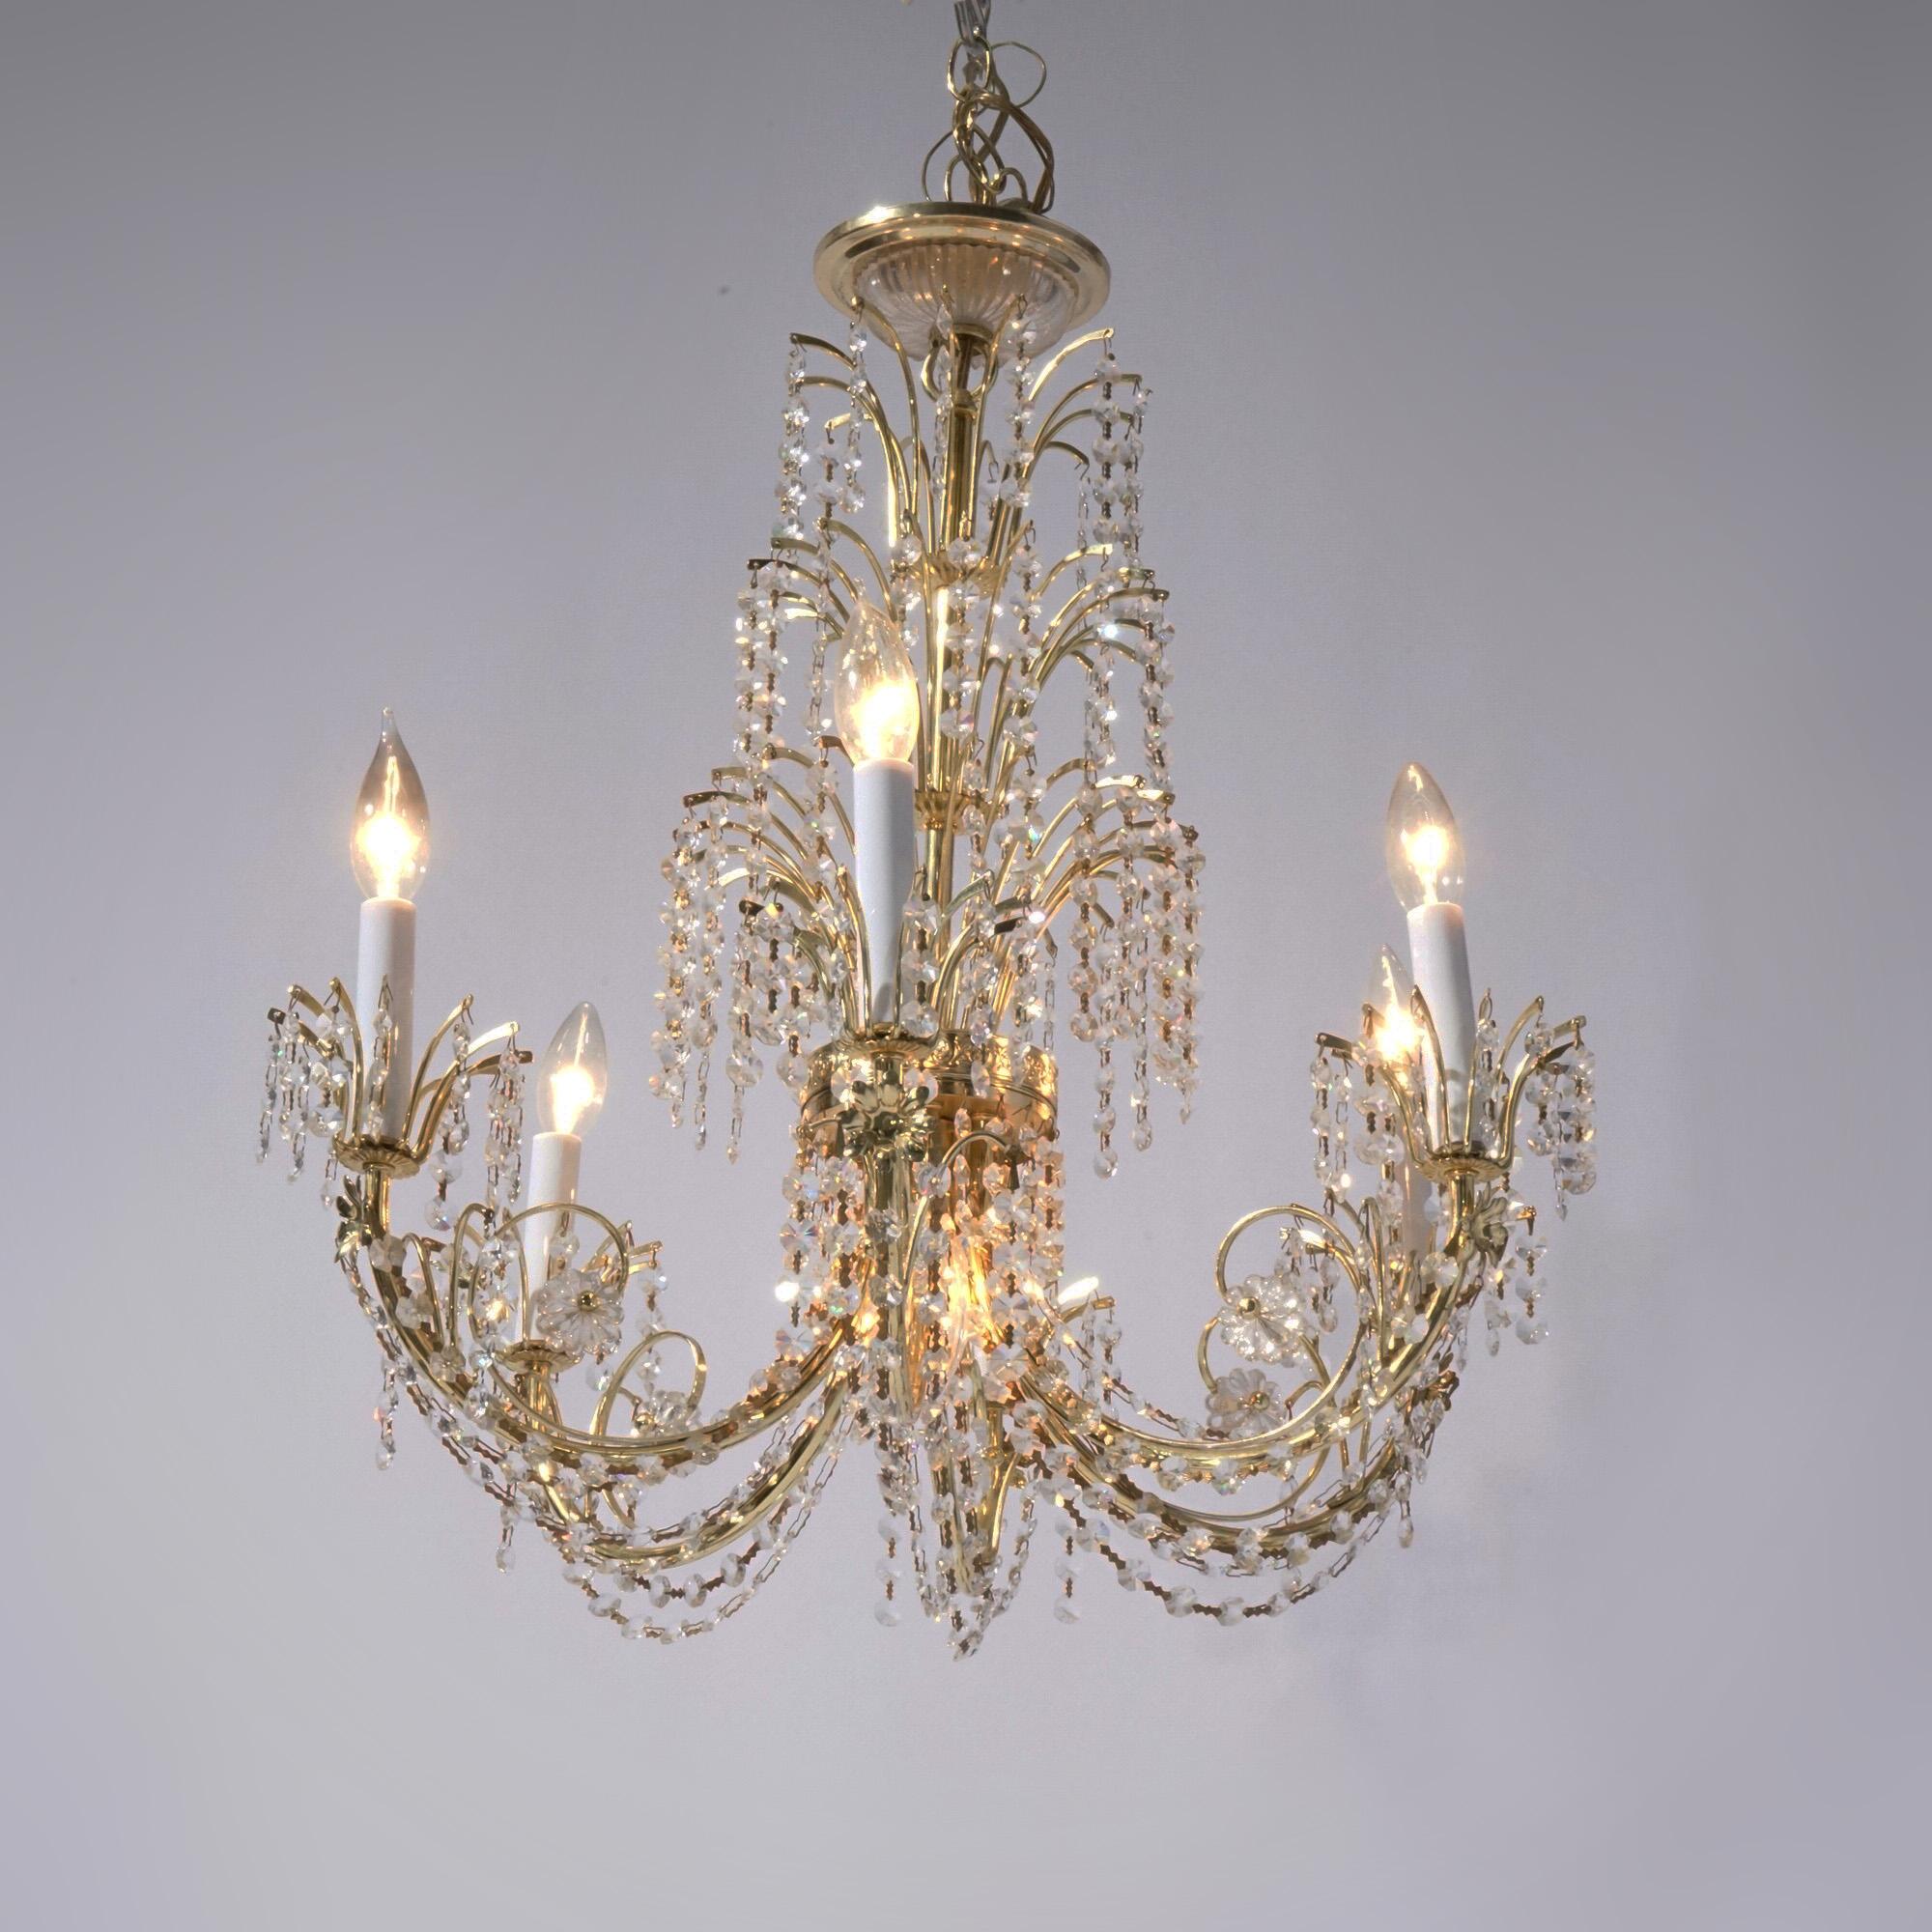 French Style Brass & Crystal Tiered Prism Chandelier 20th C For Sale 5